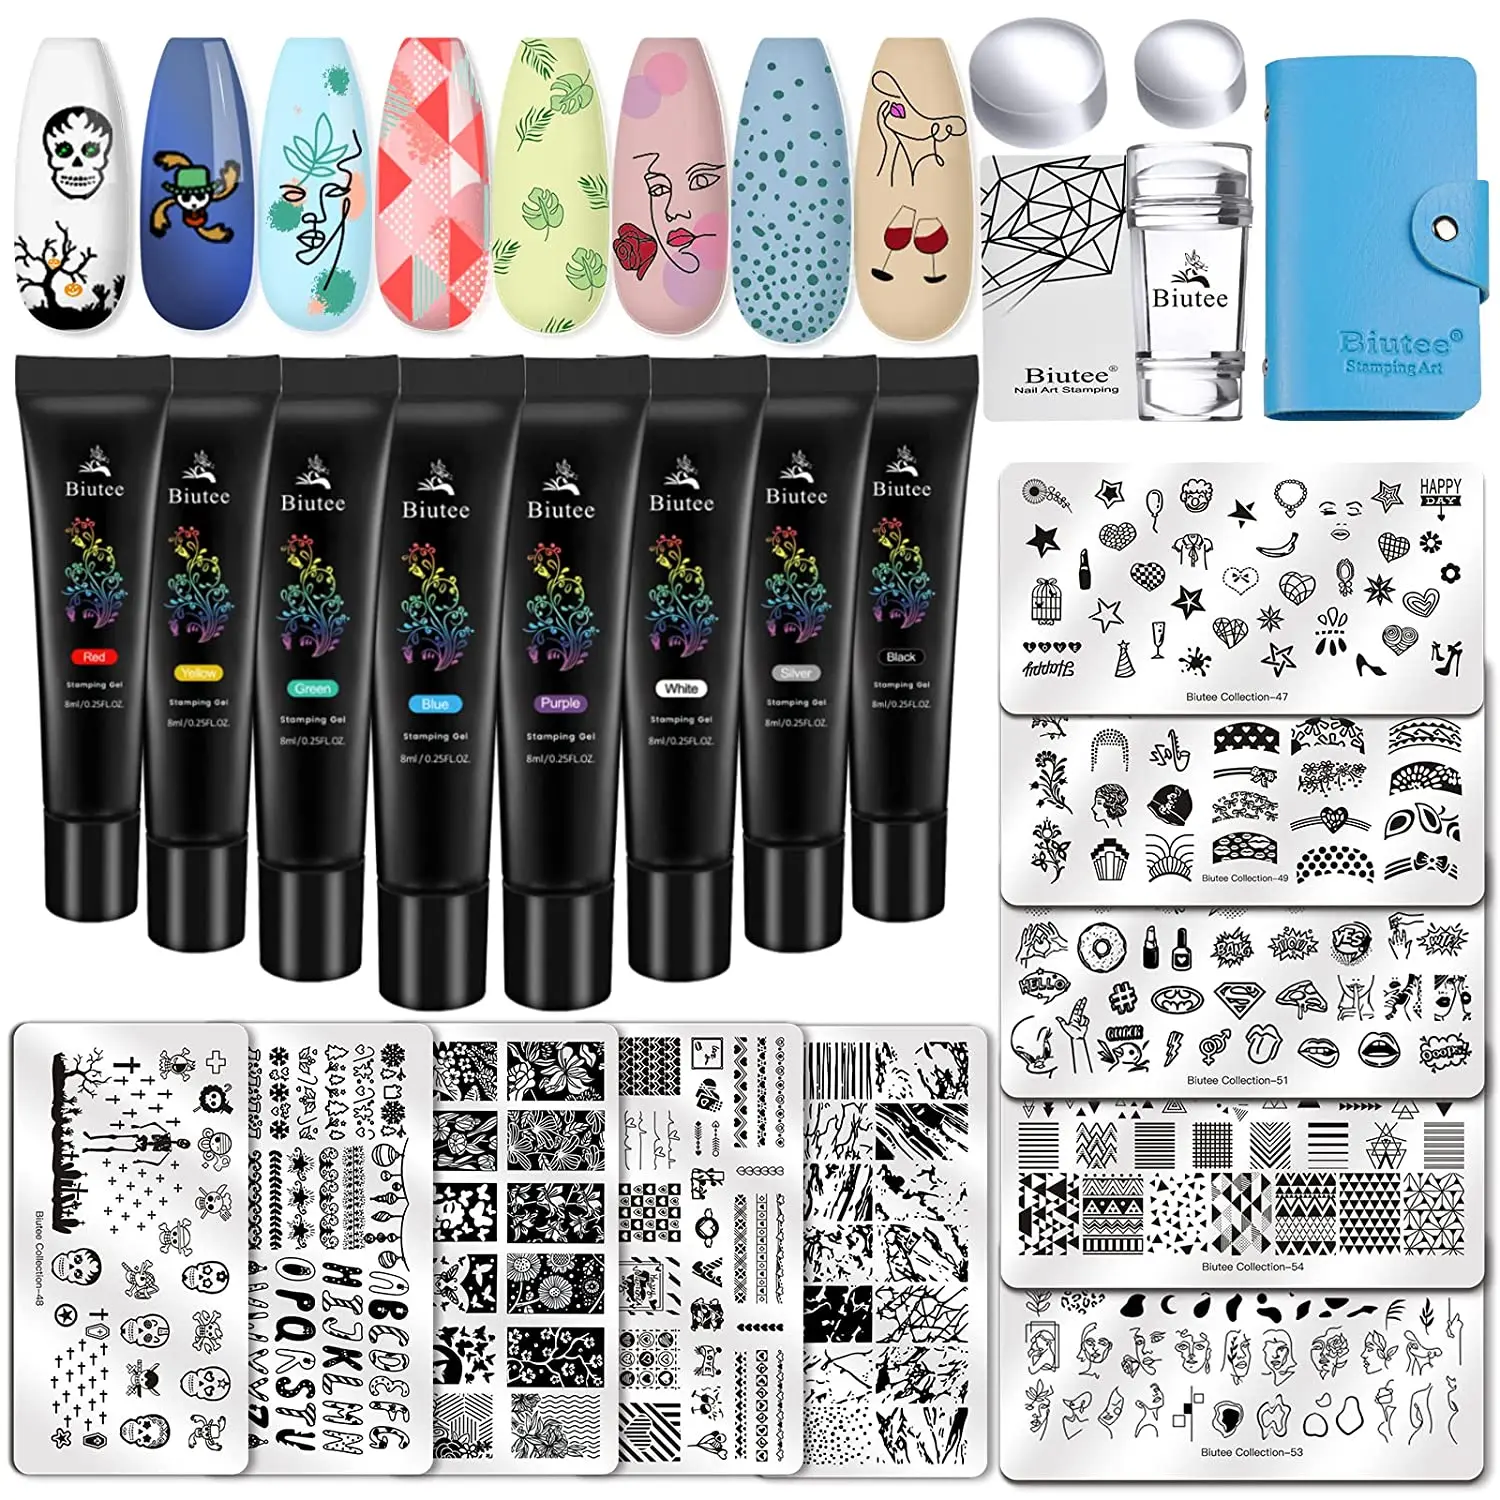 Biutee Nail Stamping Plate Kit 2 Nail Stamper 13 Nail Art Stamp Plate Set 2  Scraper Nail Stamping Kit Template Image Plate Stencils Tool for Manicure